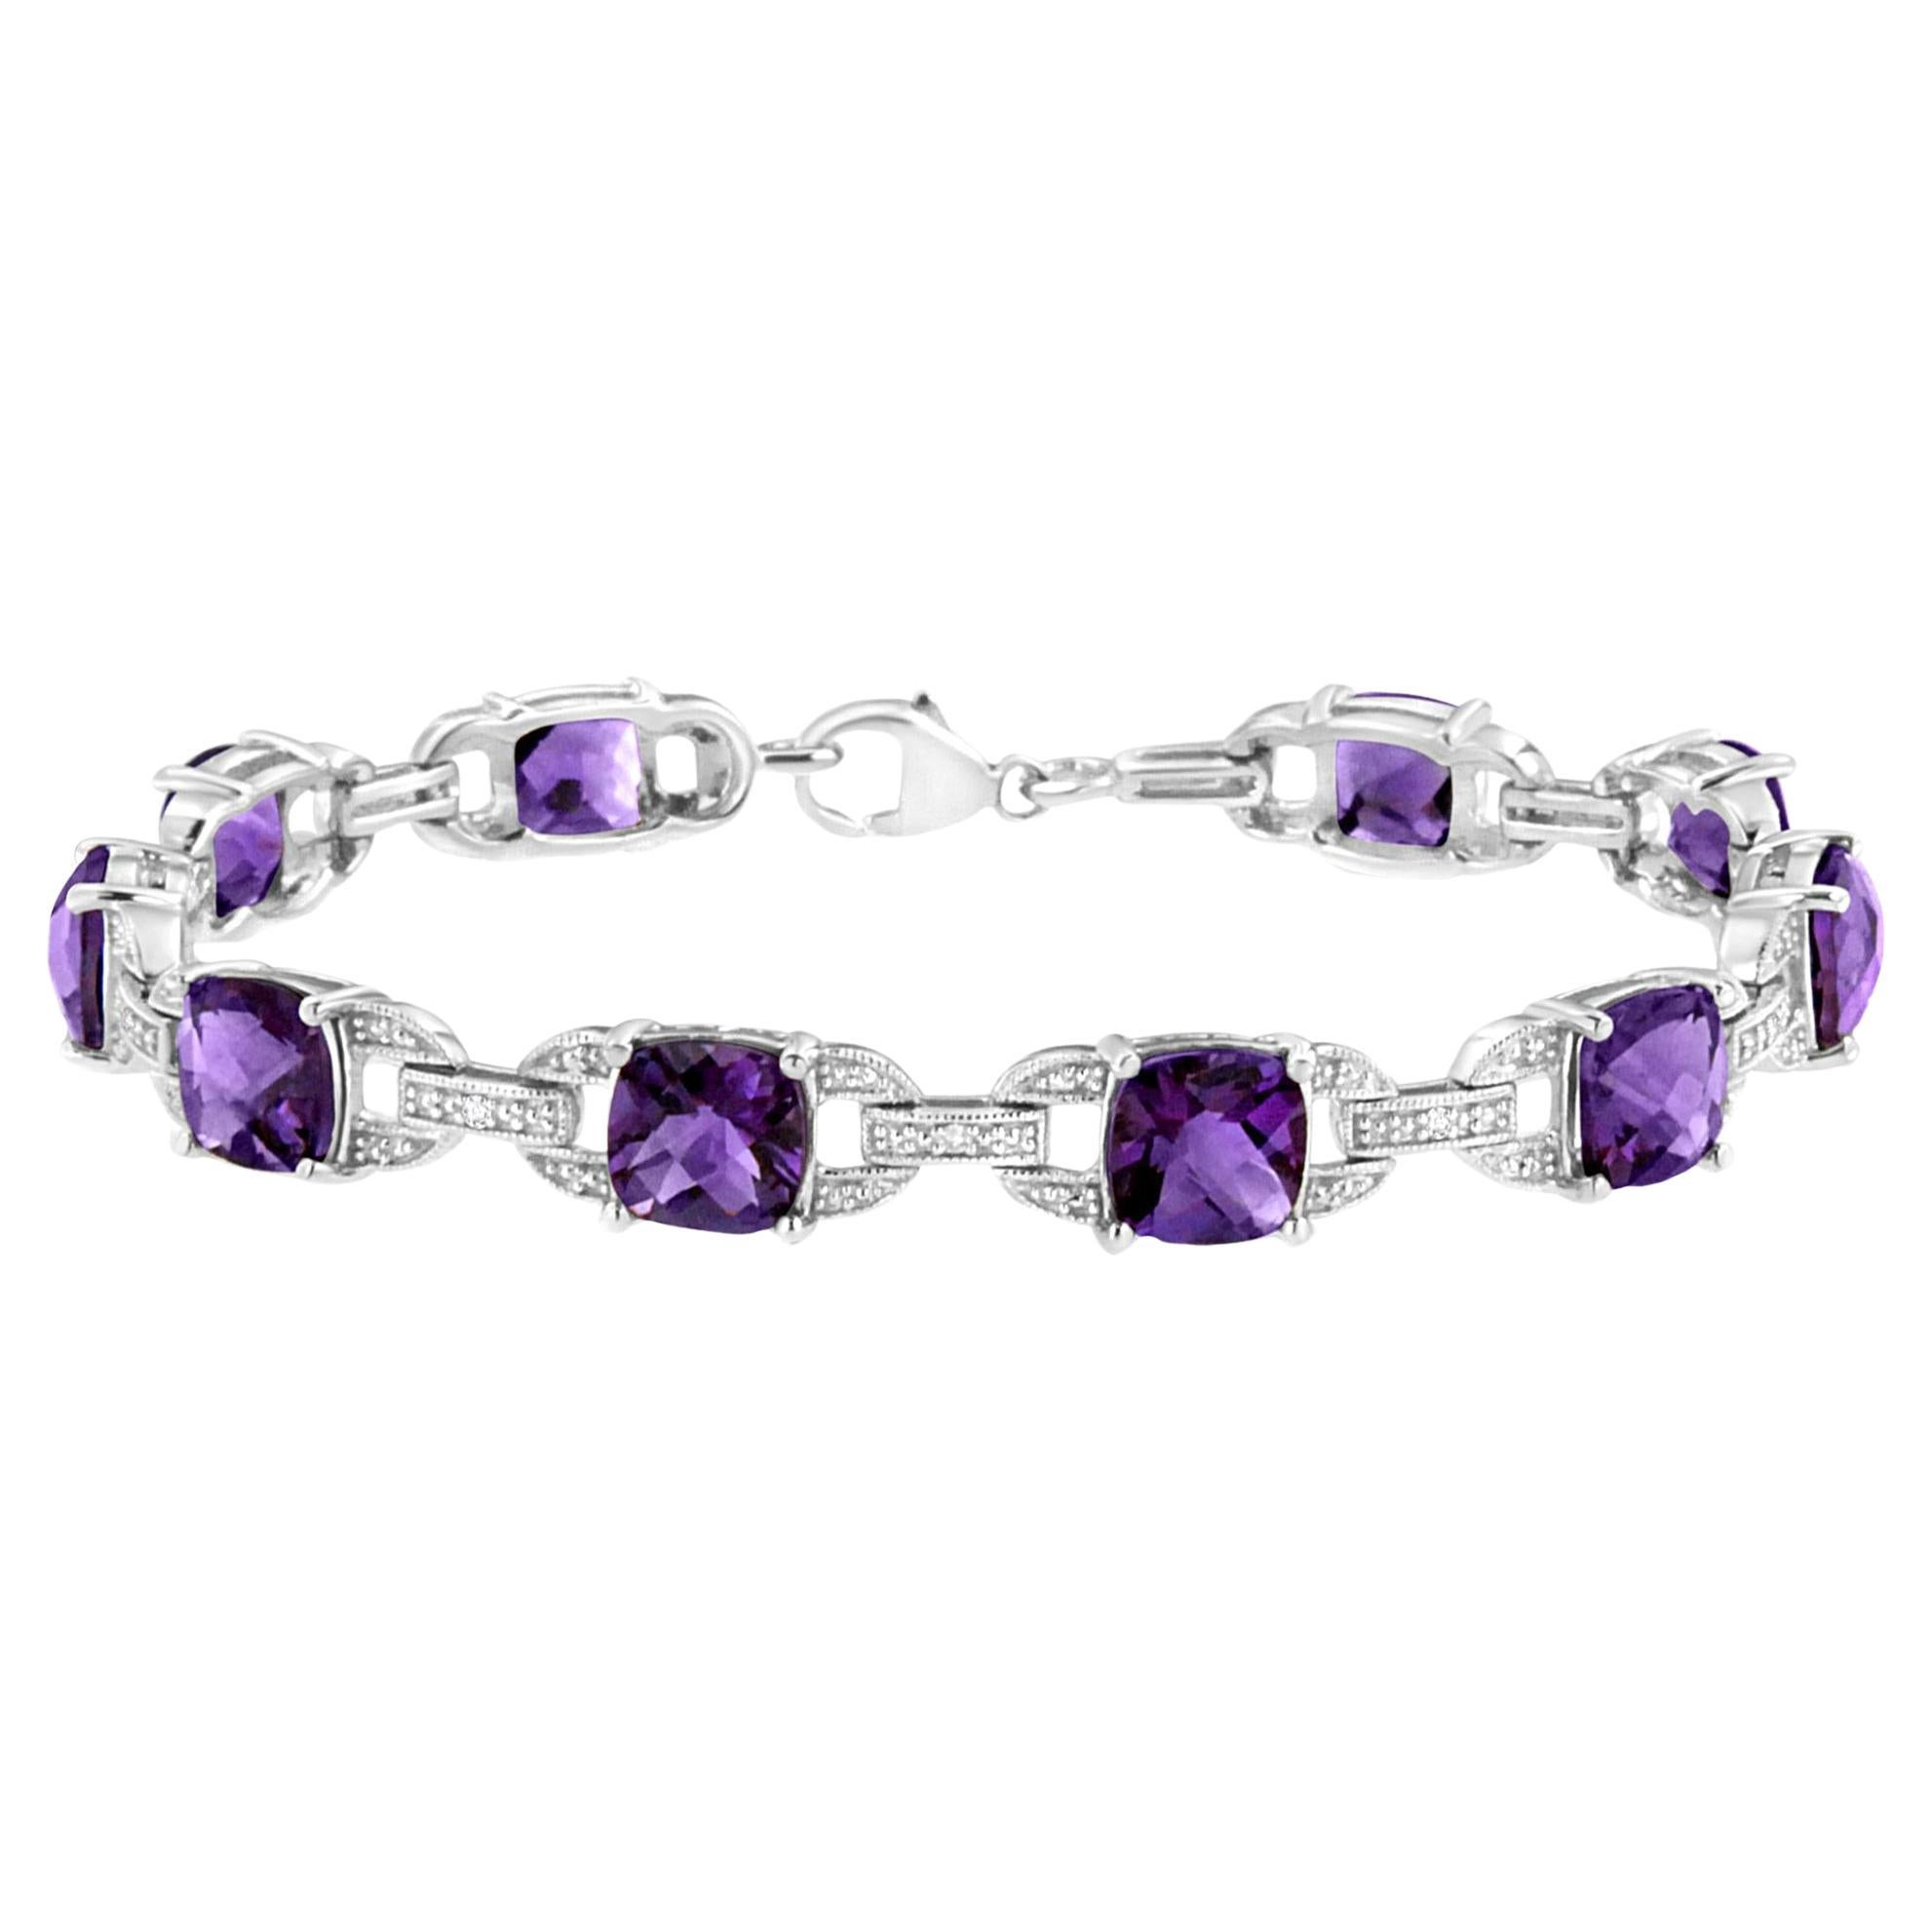 Antique Amethyst and Diamond Bracelet 15 Carats Carats Sterling Silver For Sale